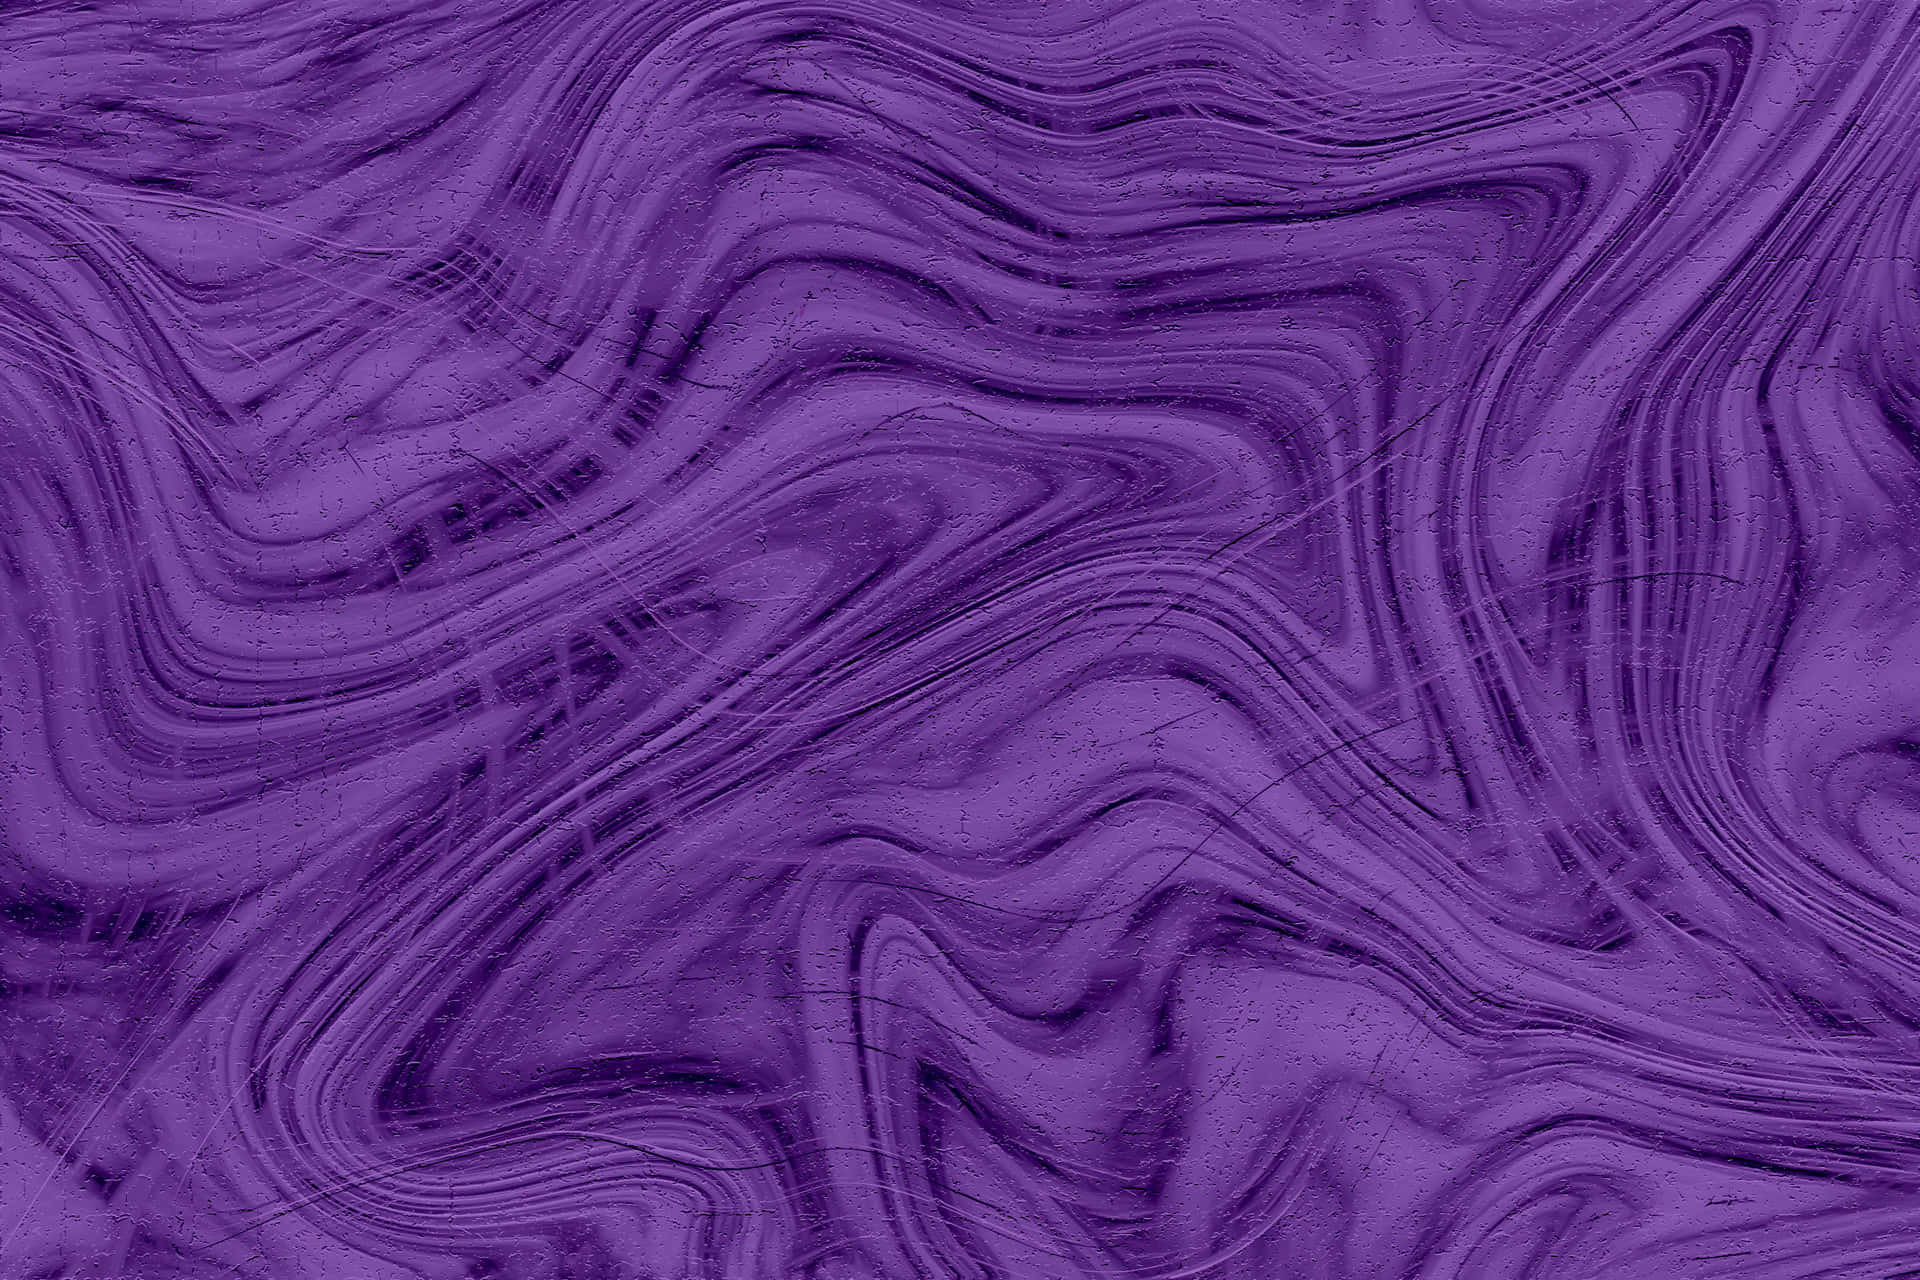 Perky&Pleasant Purple-colored Textured Background